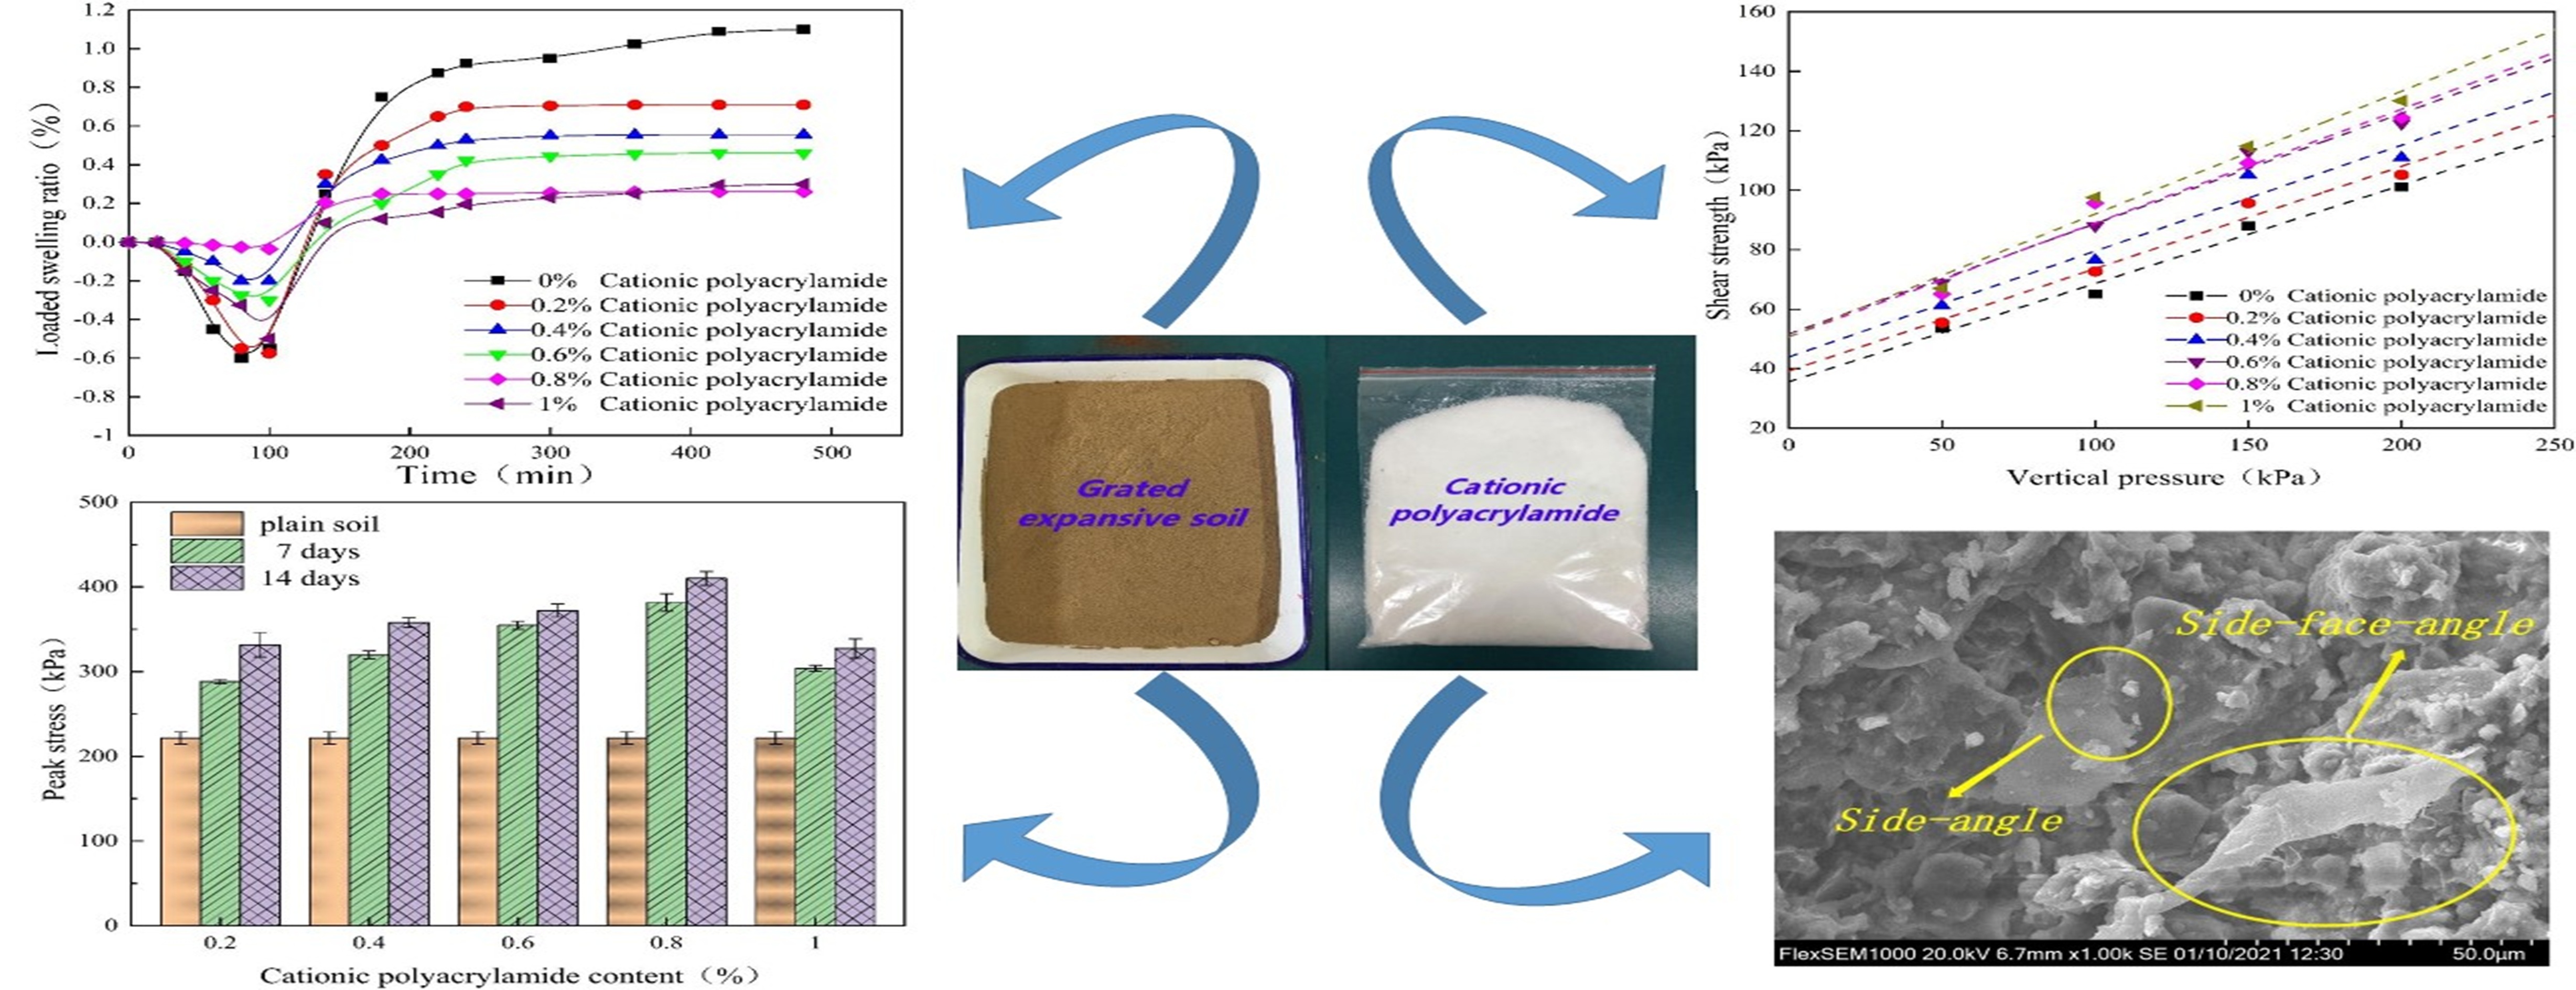 Improved Geotechnical Behavior of an Expansive Soil Amended with Cationic Polyacrylamide